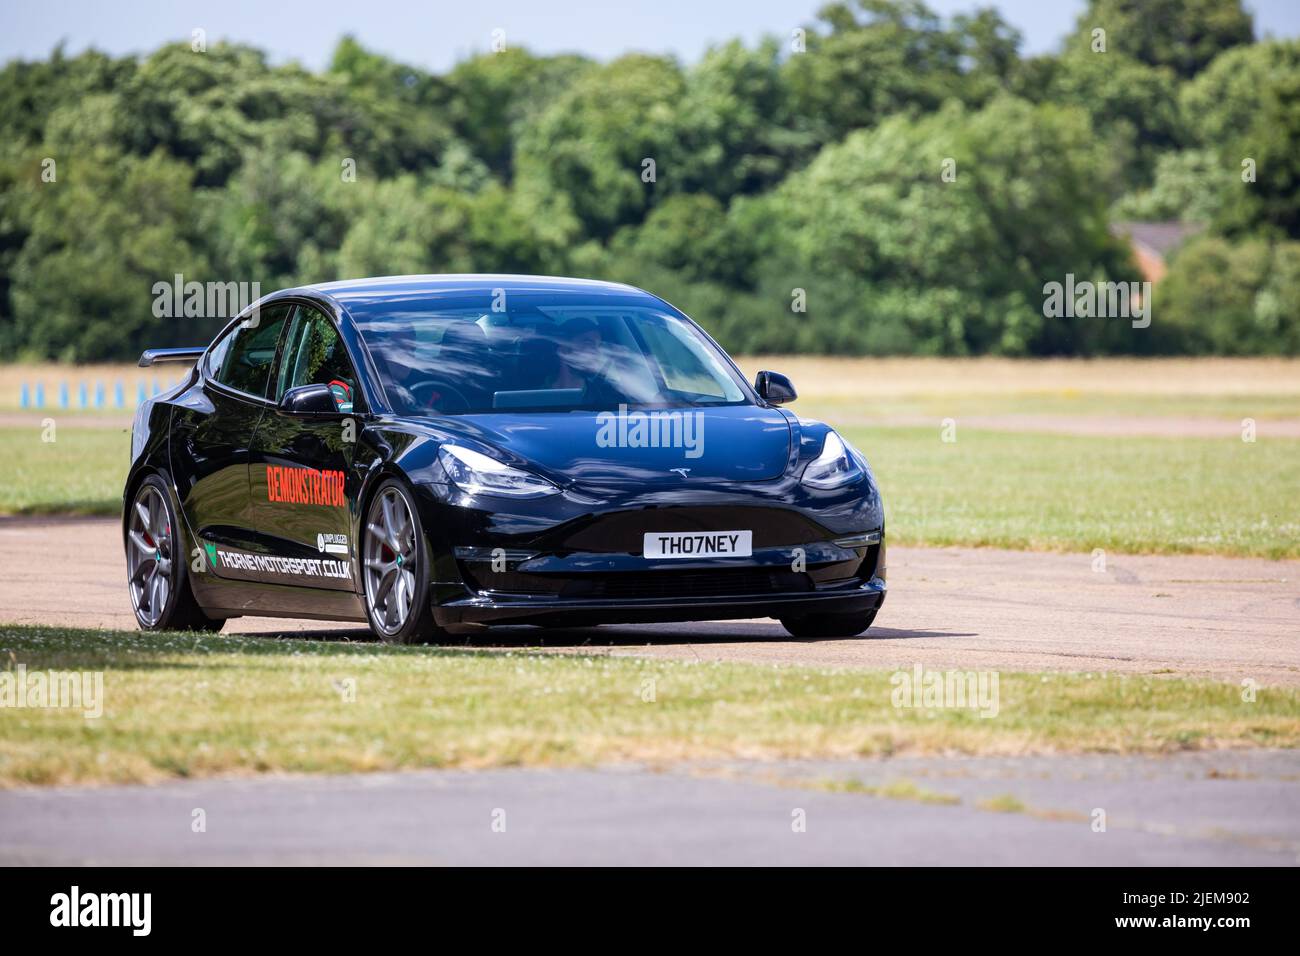 A Tesla Demonstrator car on the track at Bicester Aerodrome Stock Photo